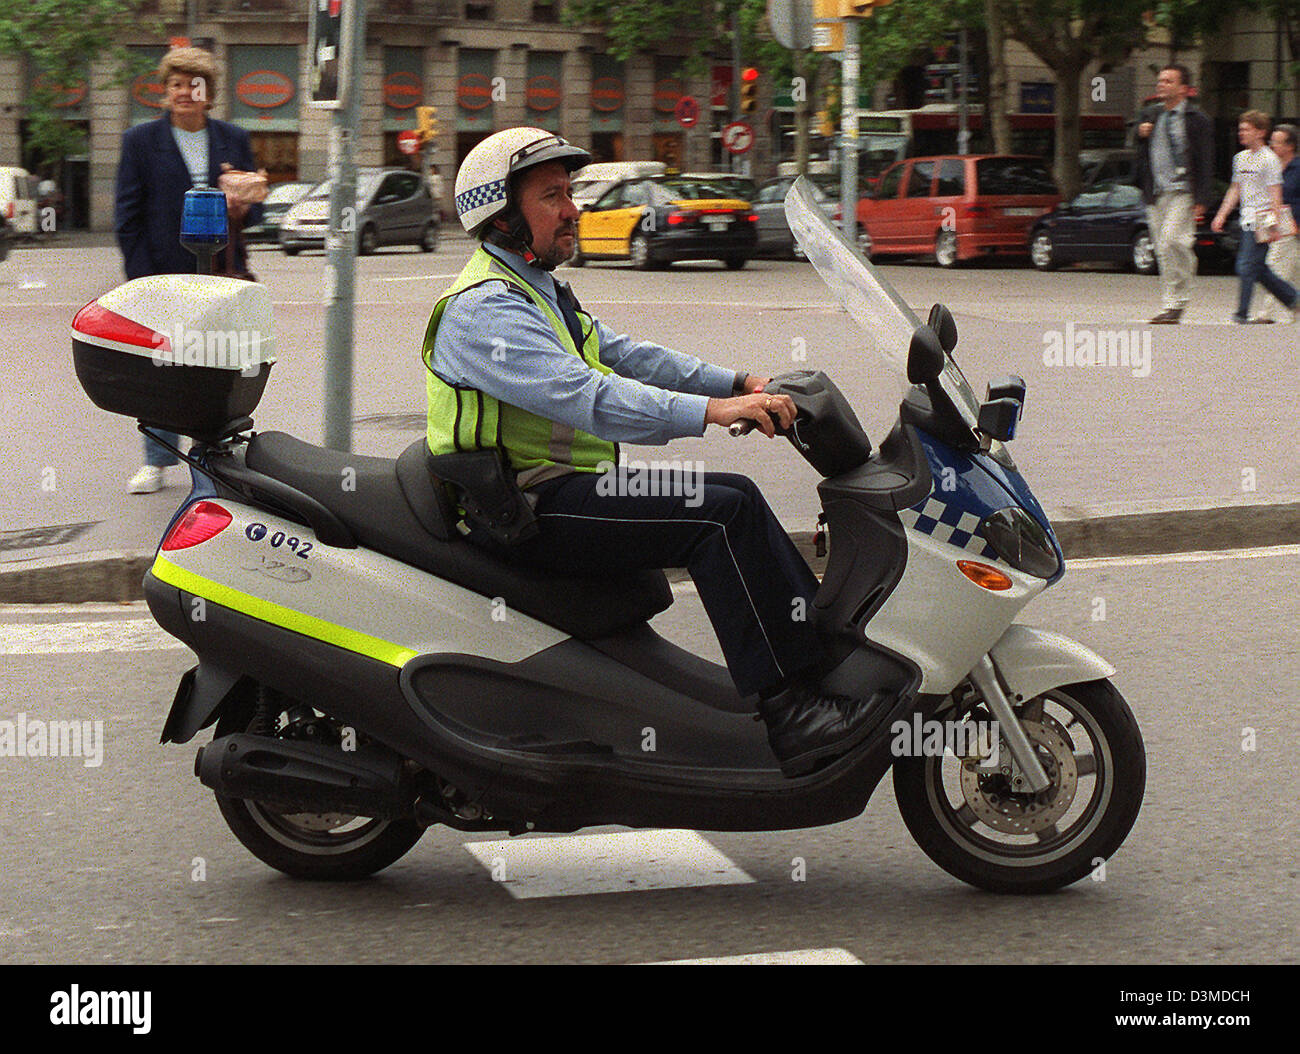 (dpa file) - A traffic police officer of the Guardia Urbana (city traffic police) drives on his scooter through downtown Barcelona near the Arc de Triomf square, Spain, 10 June 2002. Because of their blue uniform they are often mistaken as Policia Nacional officers (national police), who are however responsible for national security matters. Only the blue and white chequered strips Stock Photo